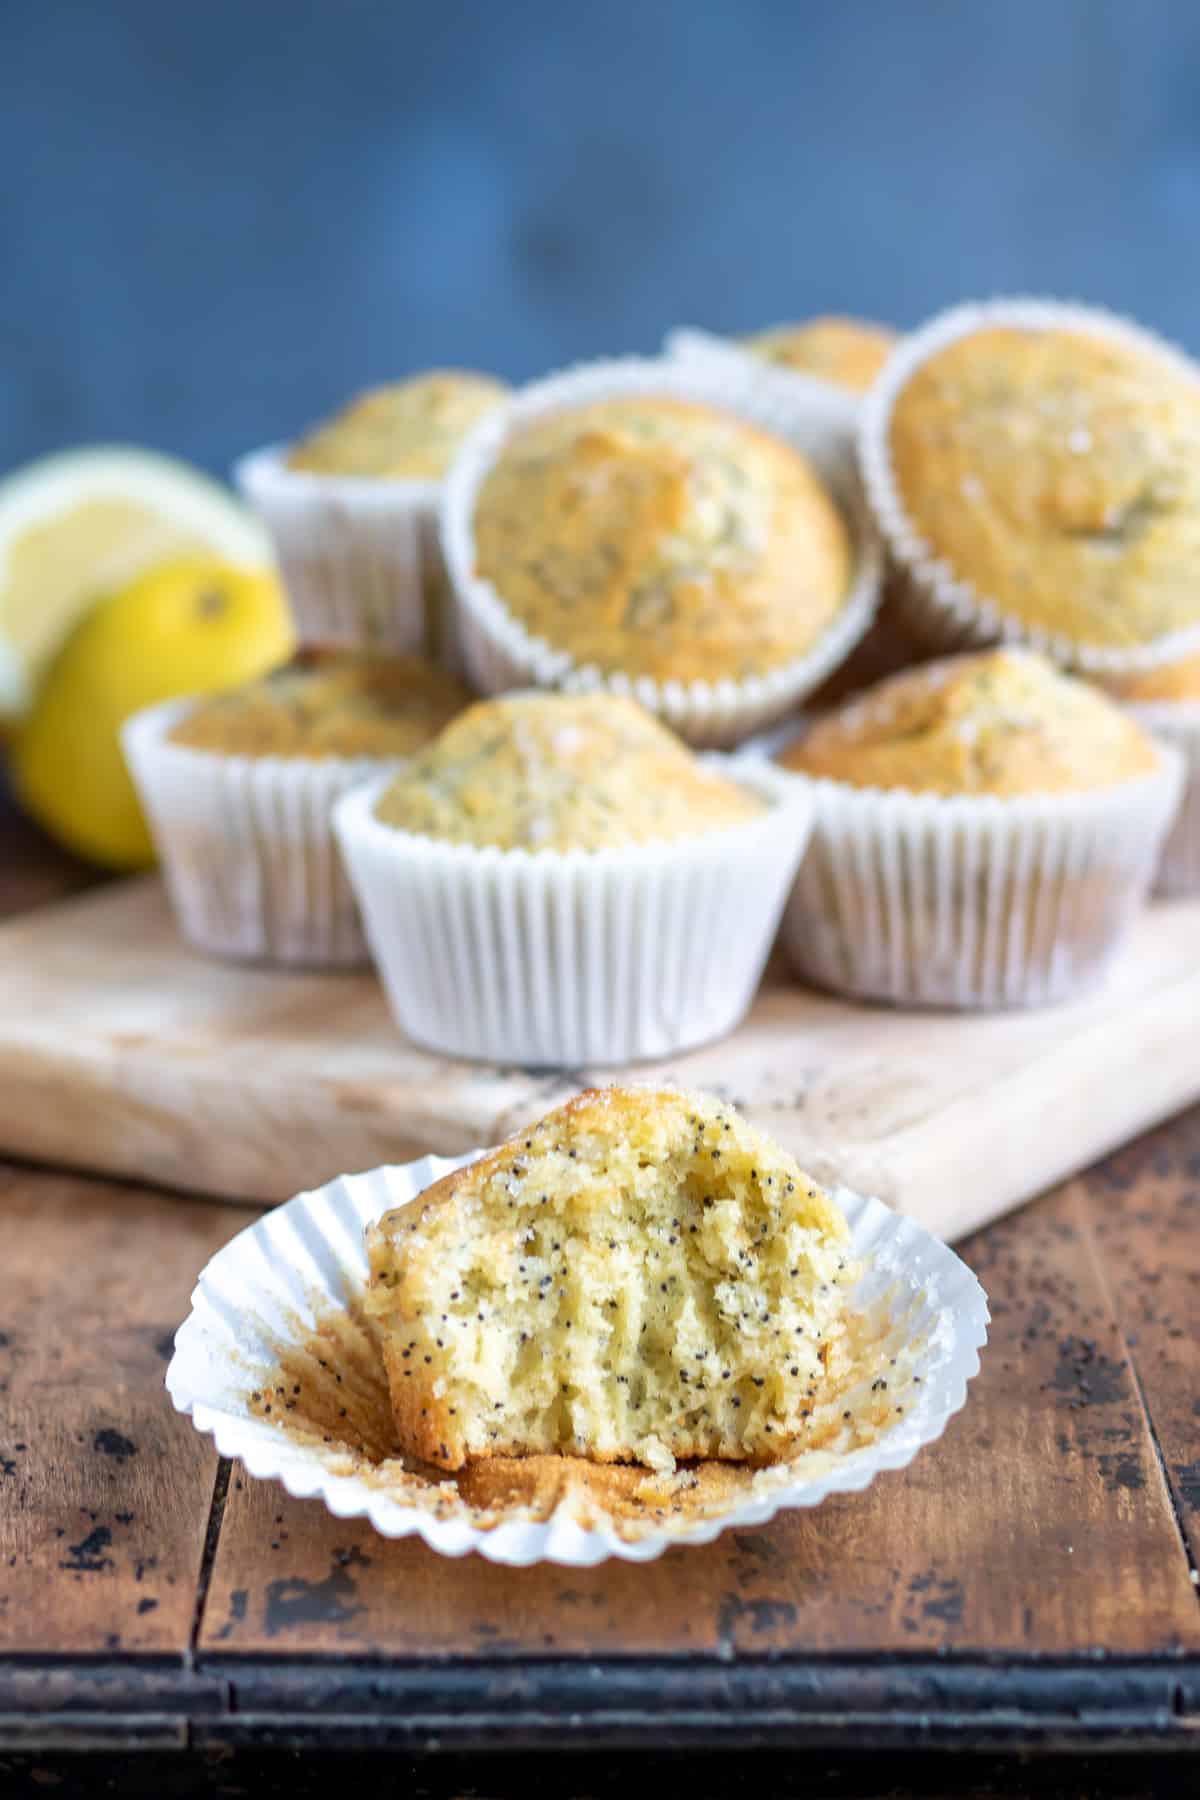 Muffin with a bite out in front of other lemon poppyseed muffins.